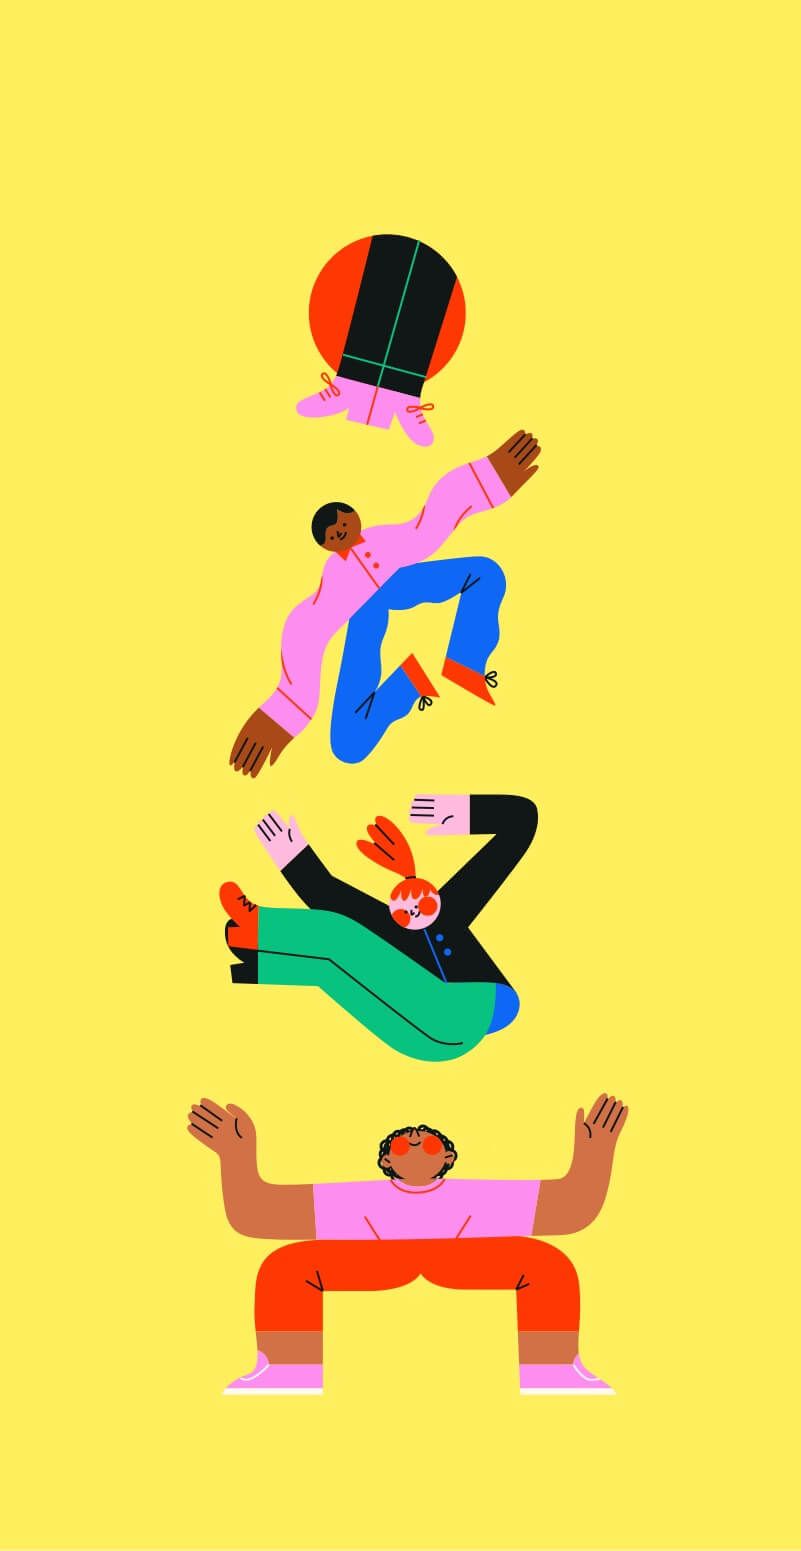 Colorful illustrations of characters jumping by Tania Yakunova for Linearity Curve